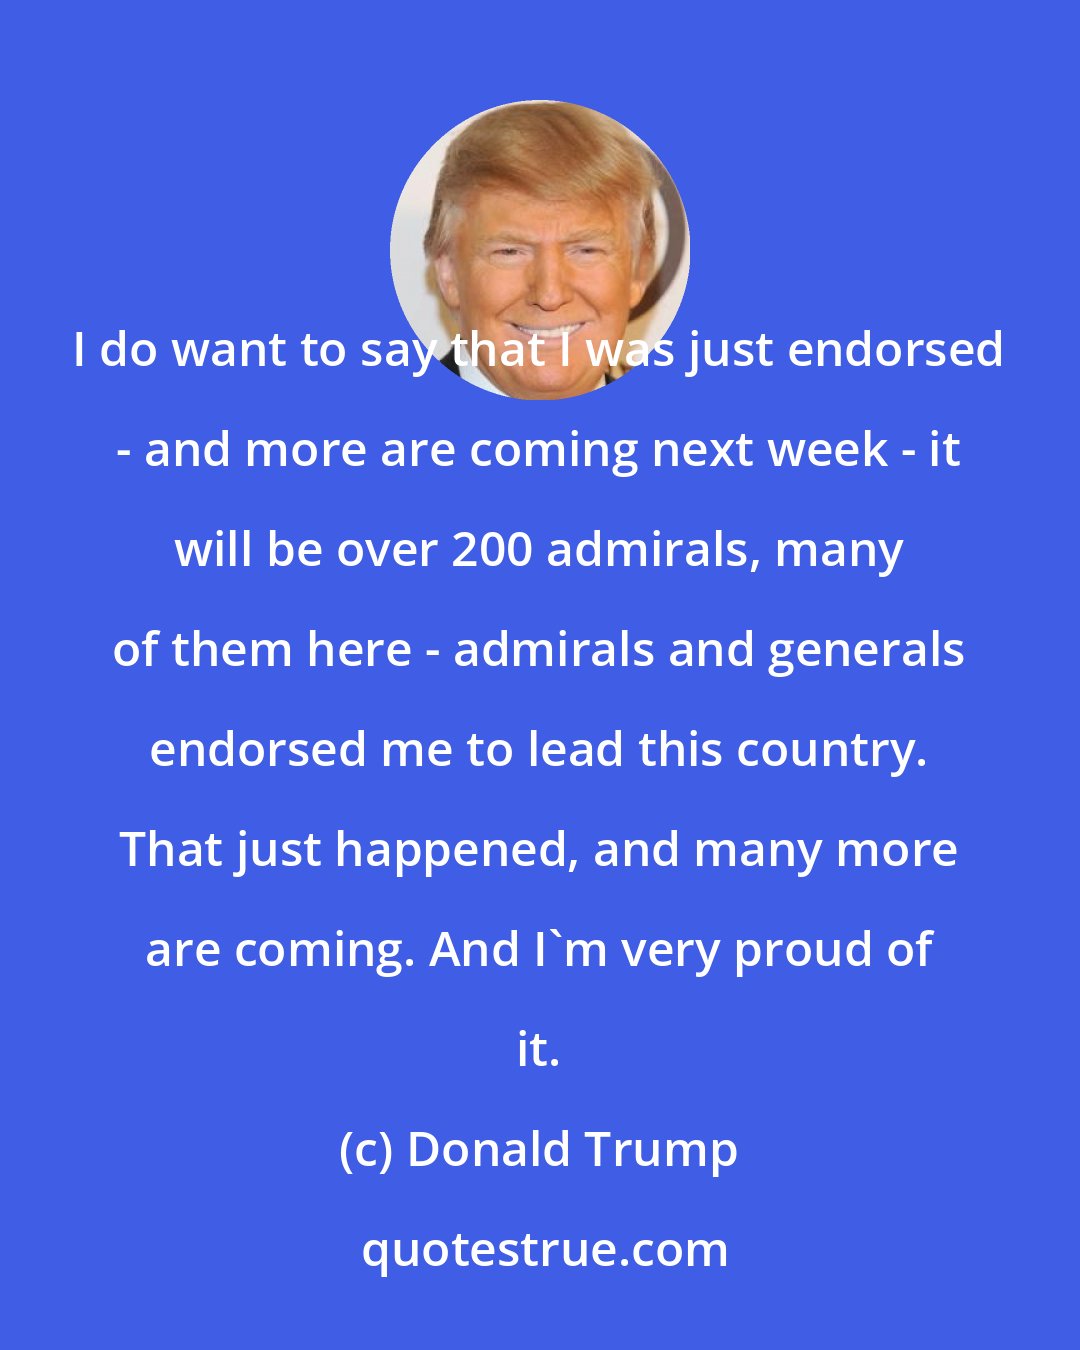 Donald Trump: I do want to say that I was just endorsed - and more are coming next week - it will be over 200 admirals, many of them here - admirals and generals endorsed me to lead this country. That just happened, and many more are coming. And I'm very proud of it.